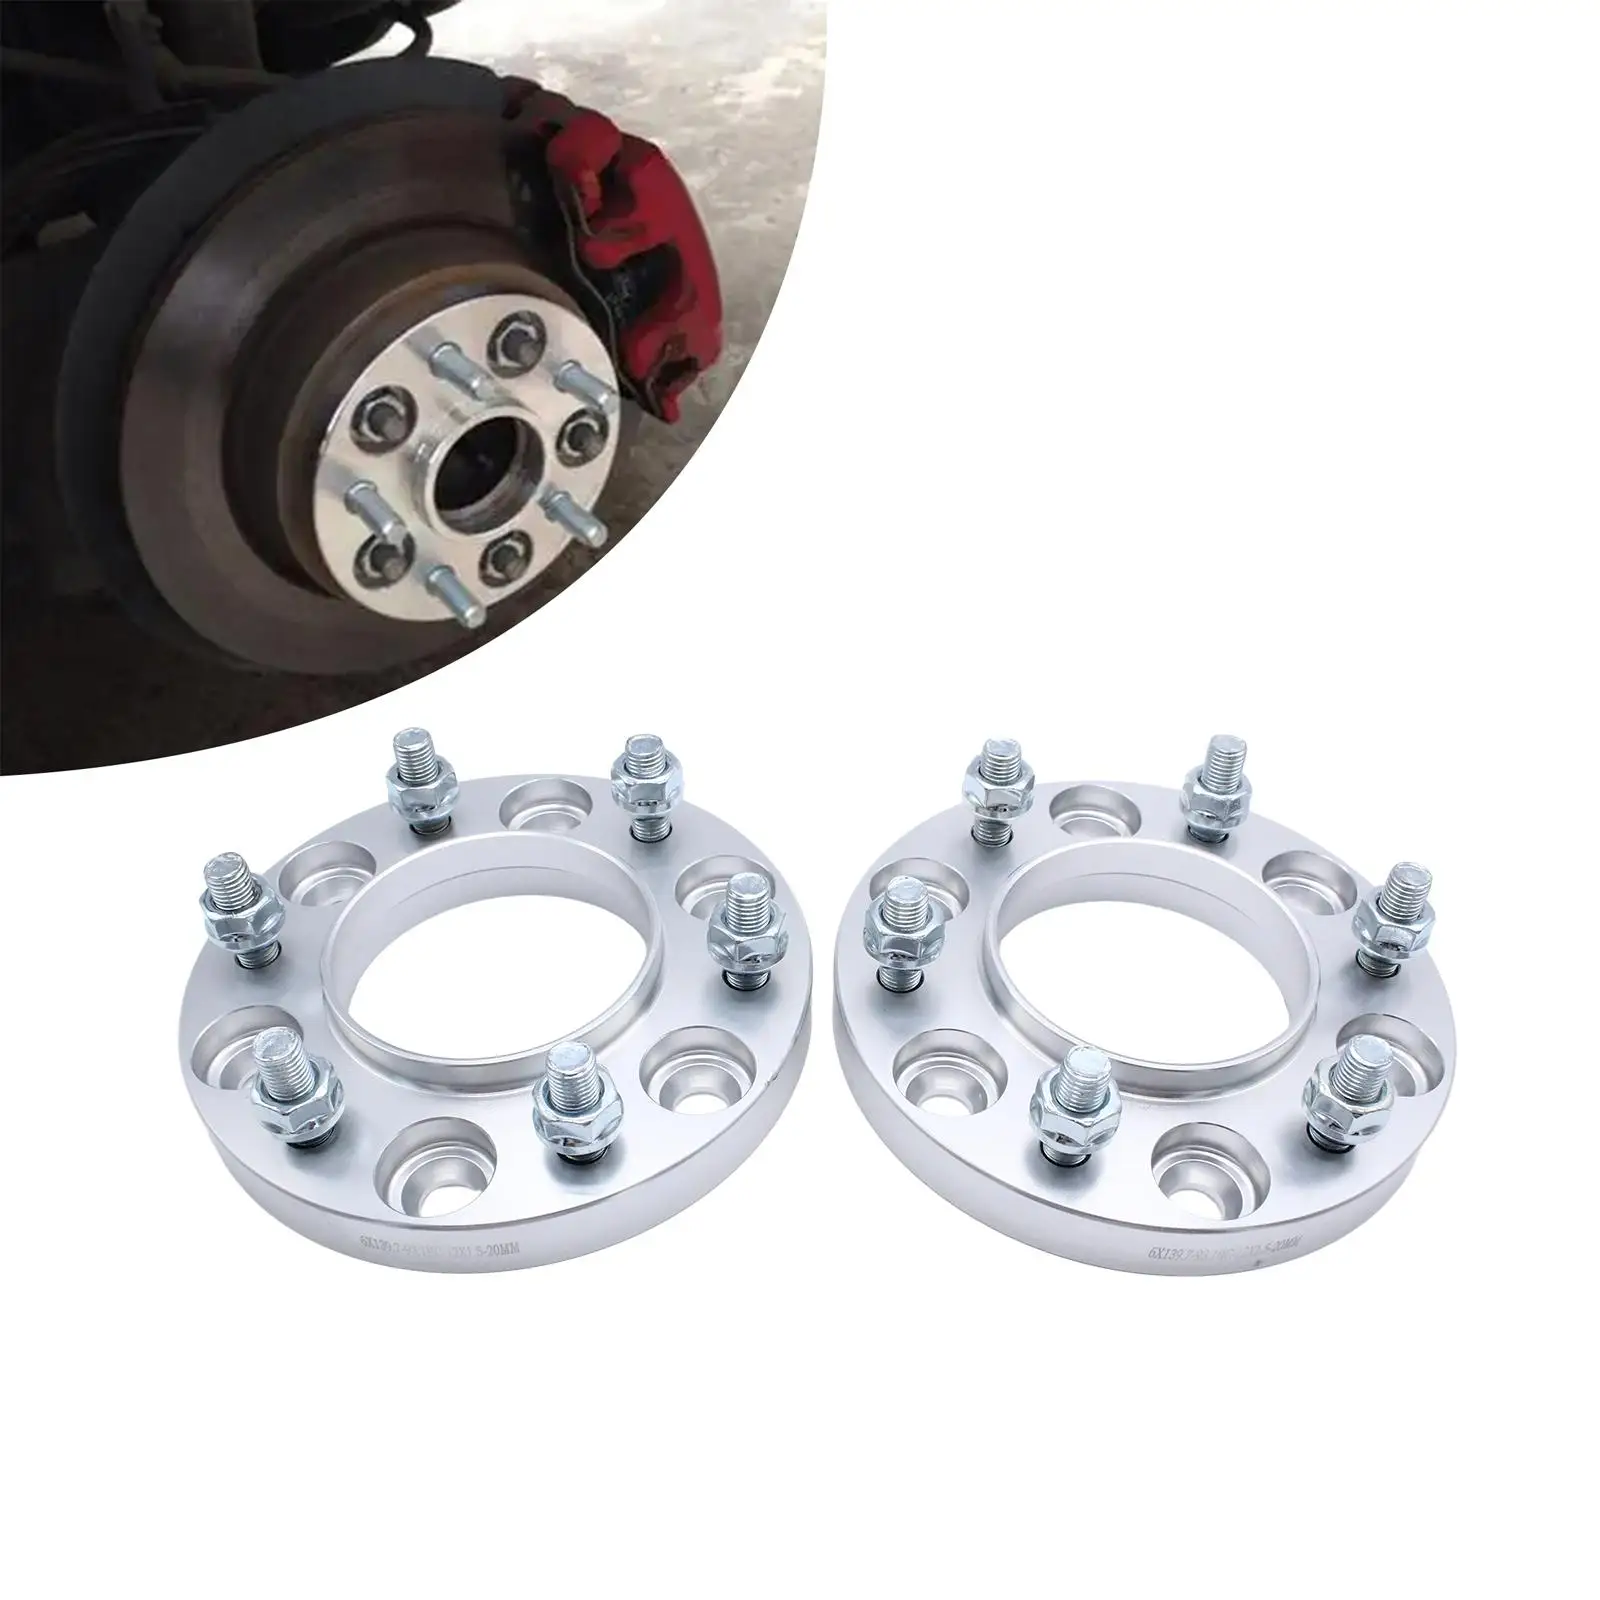 2Pcs Wheel Spacers Metal Sturdy with Bolts for Ranger Stable Performance Easily Install Automotive Accessories Replacement